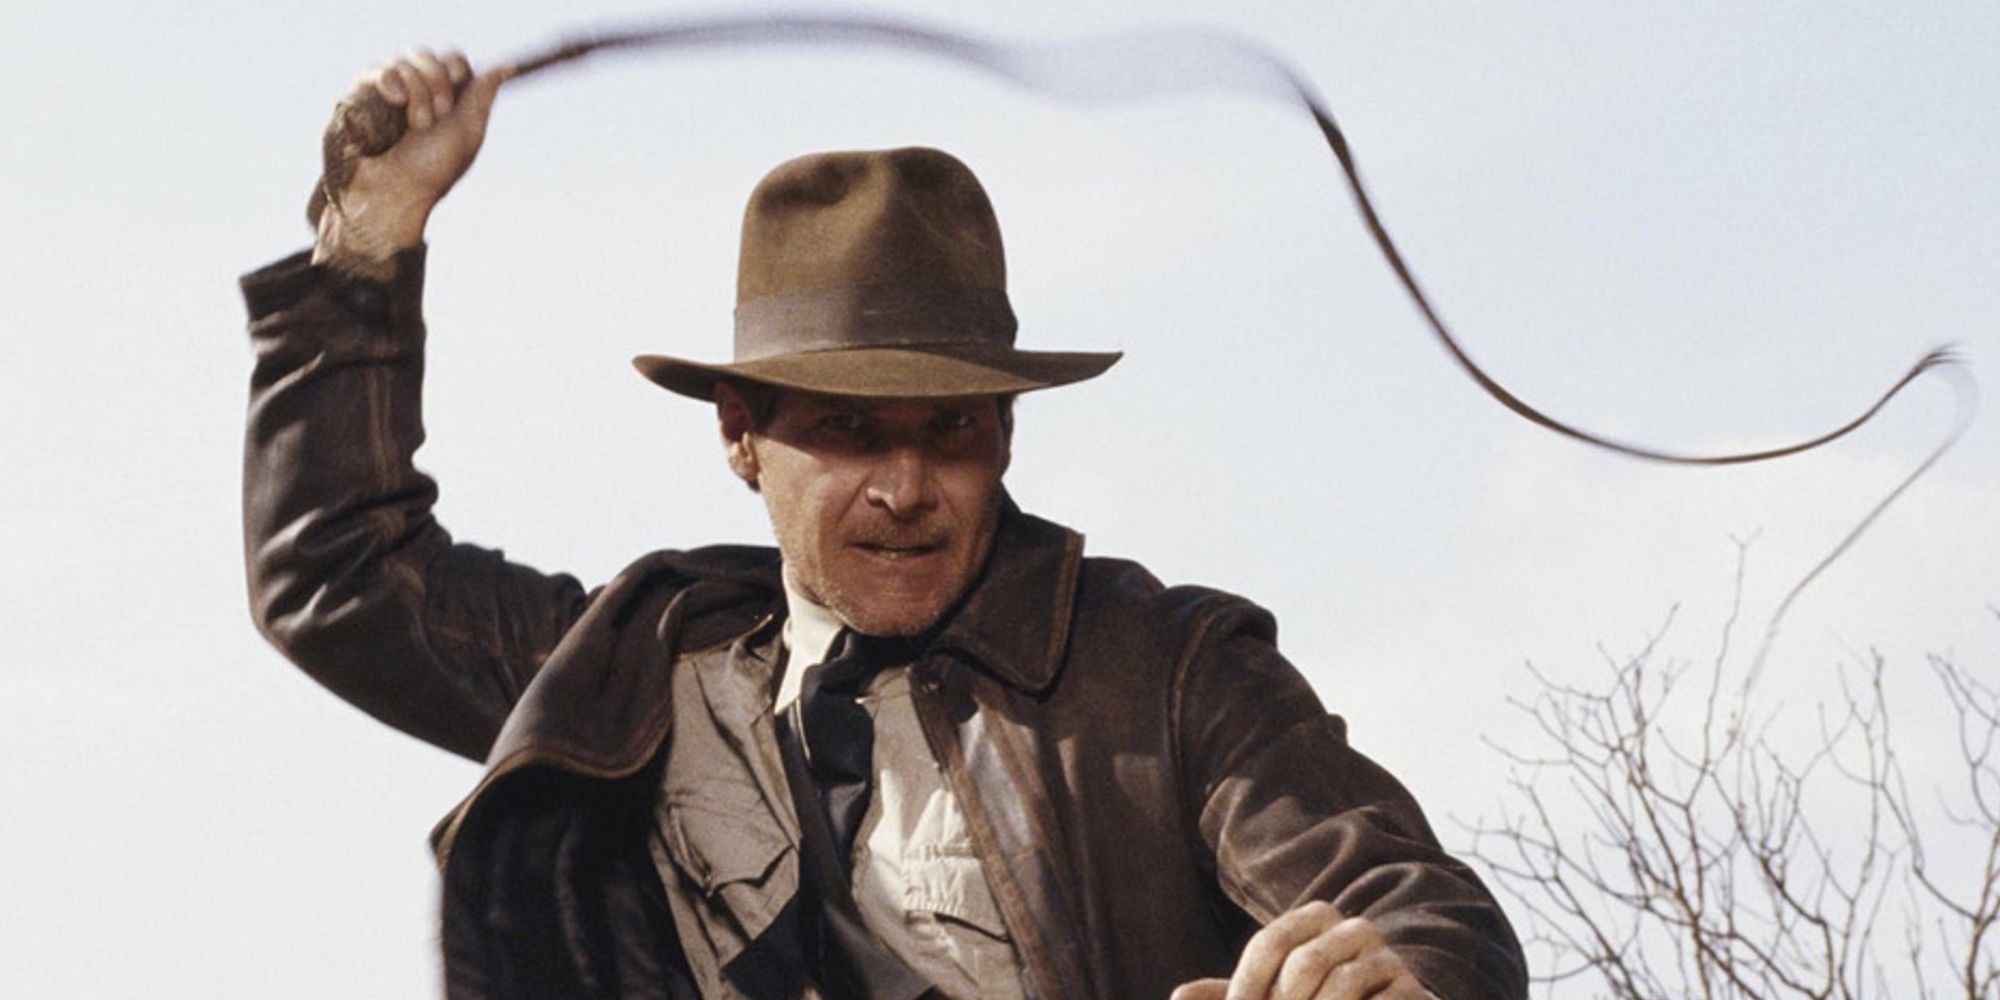 Harrison Ford as Indy using his whip in Indiana Jones and the Last Crusade 